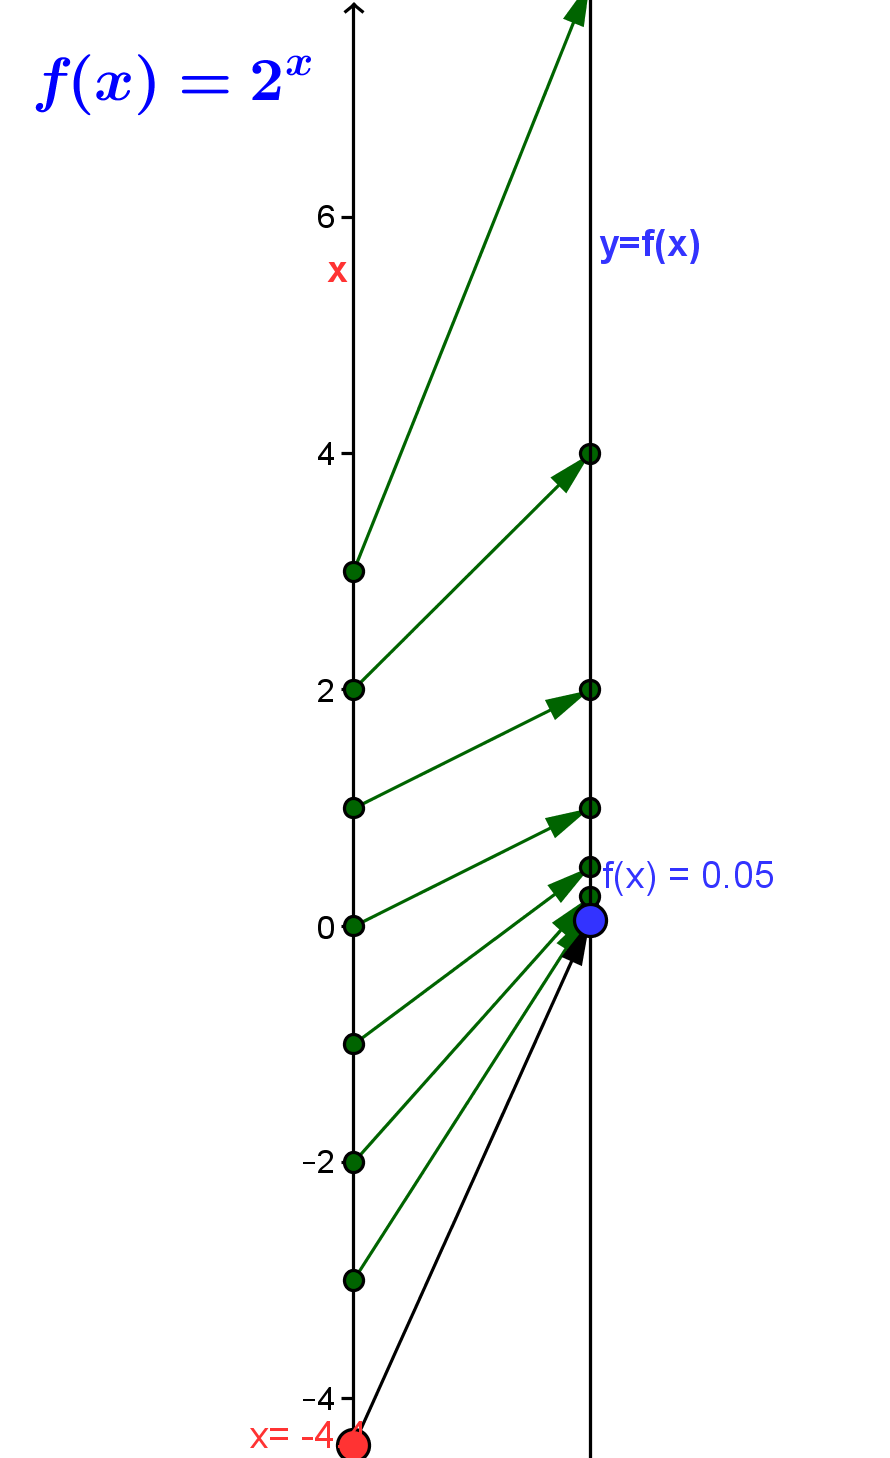 Mapping Diagram for f(x) =
                      2^x